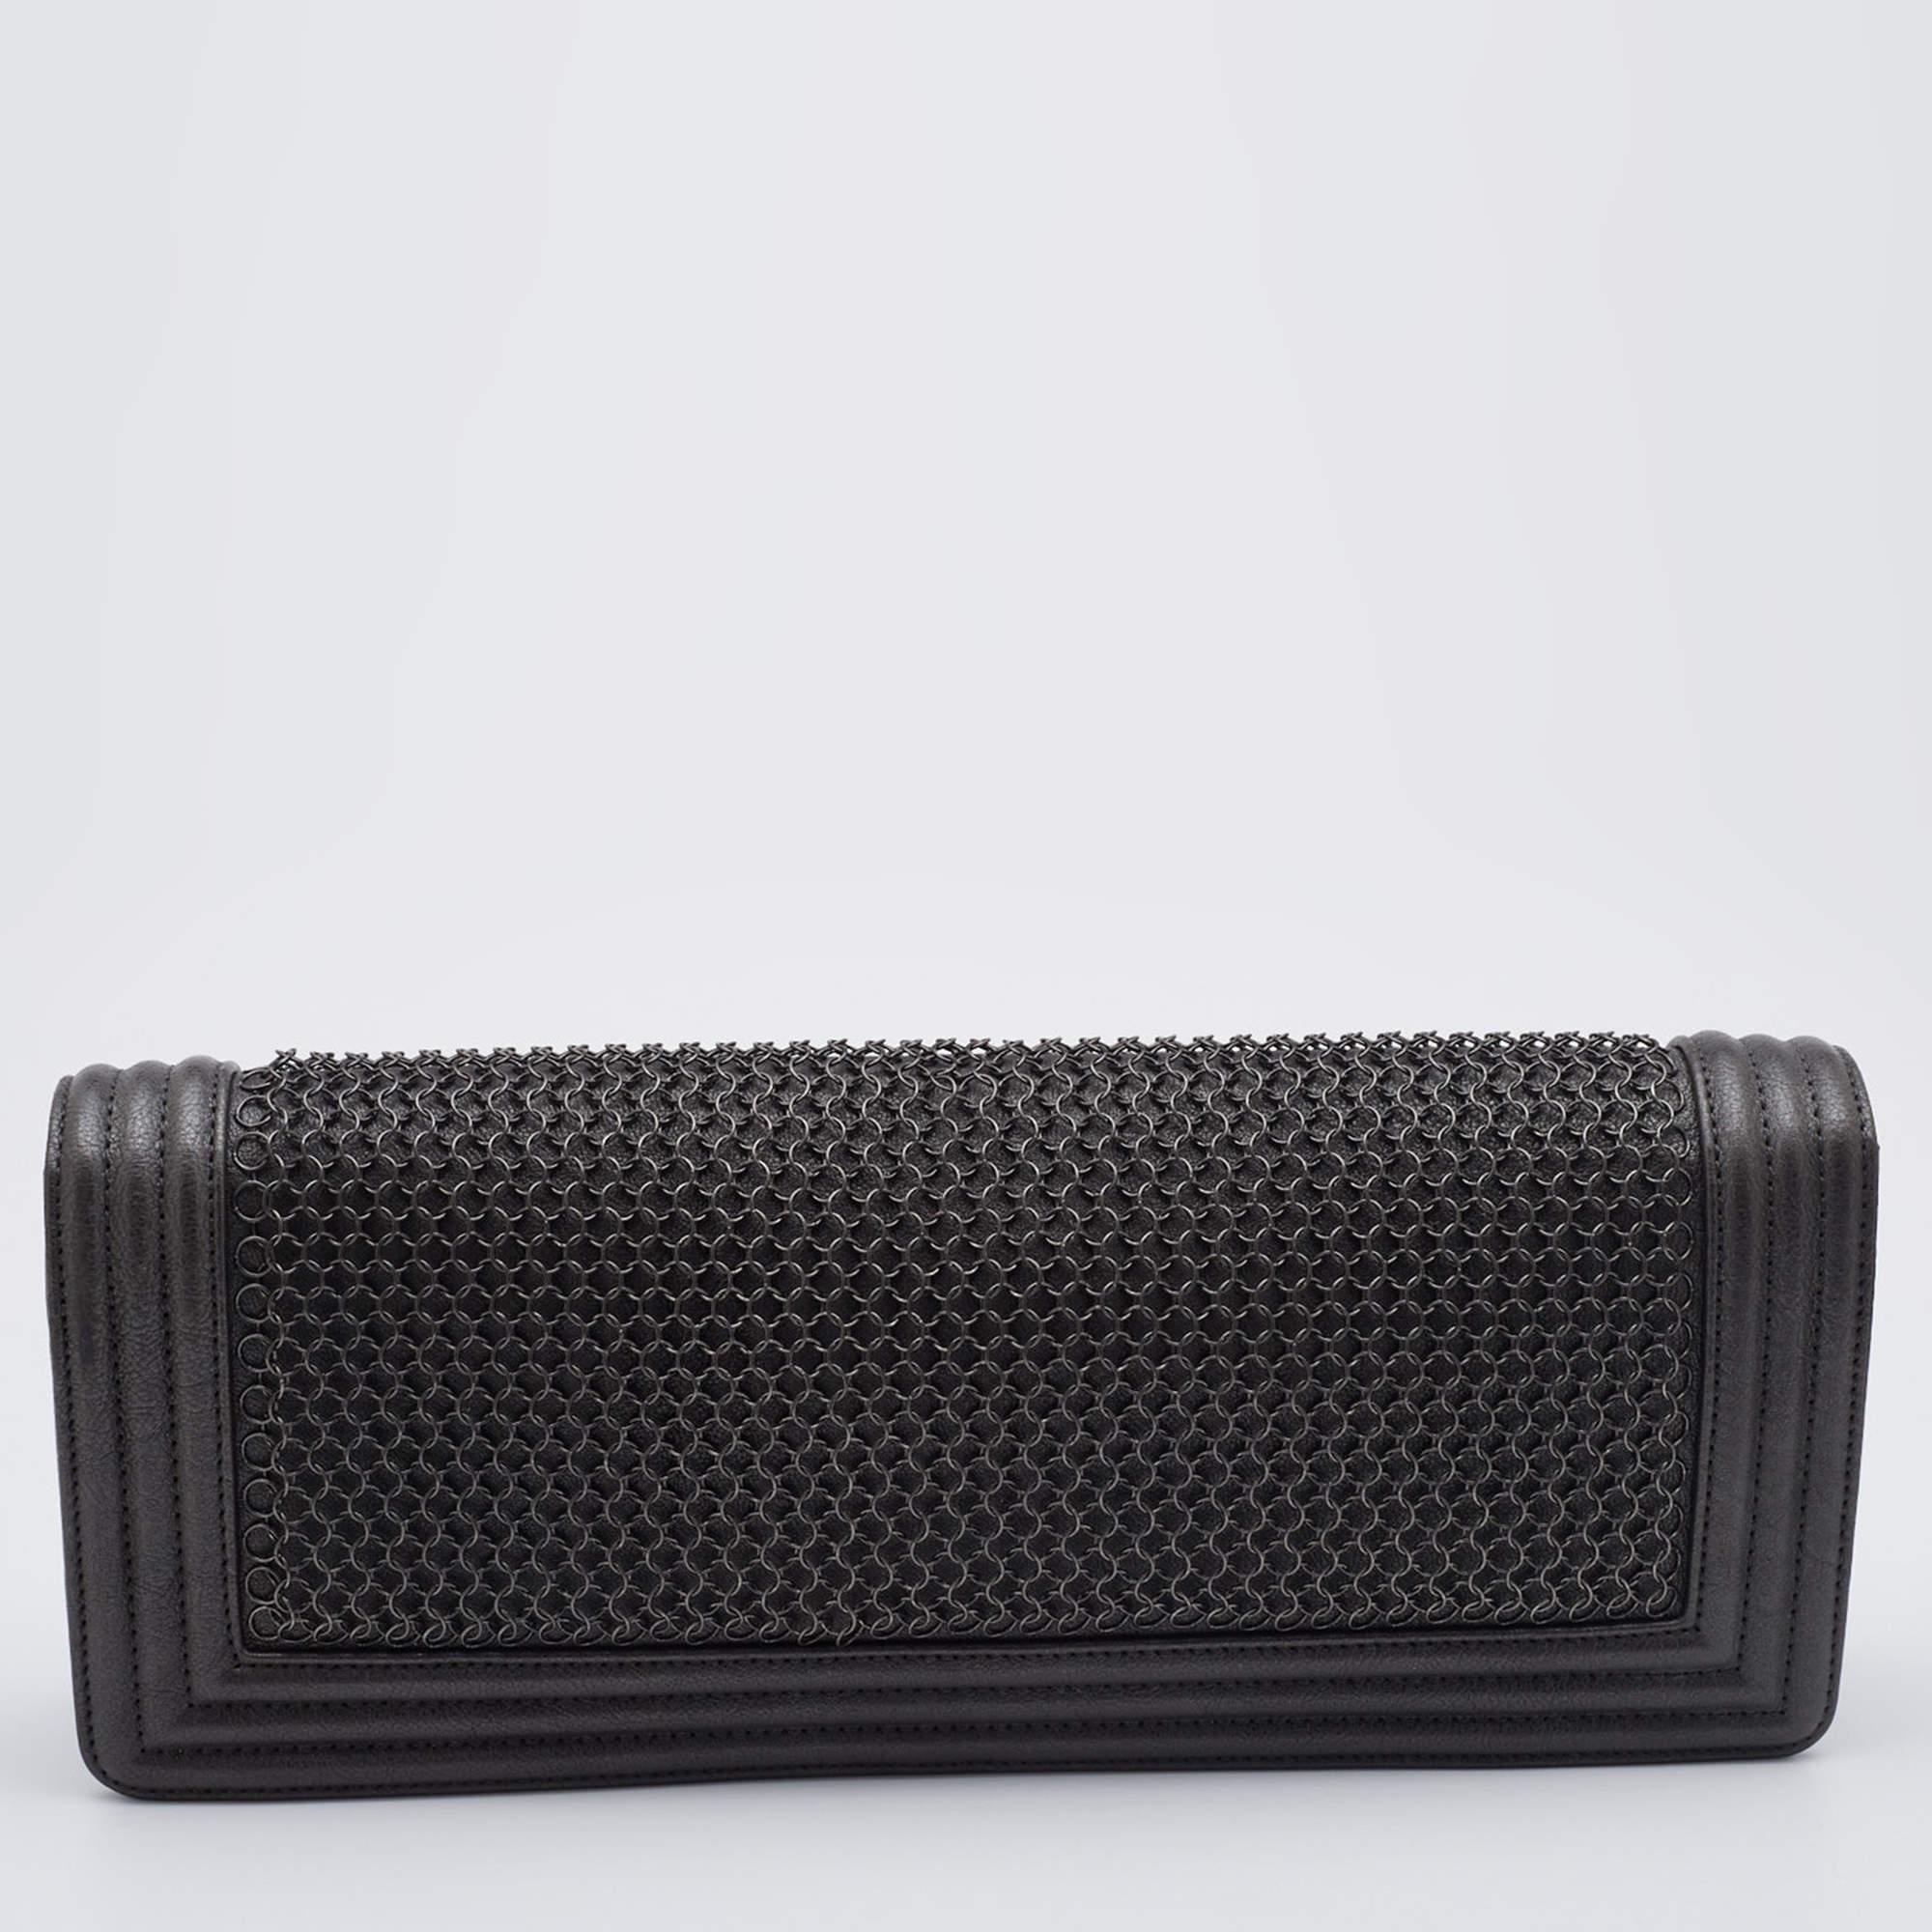 This designer clutch for women has the kind of design that ensures high appeal, whether held in your hand or tucked under your arm. It is a meticulously-crafted piece bound to last a long time.

